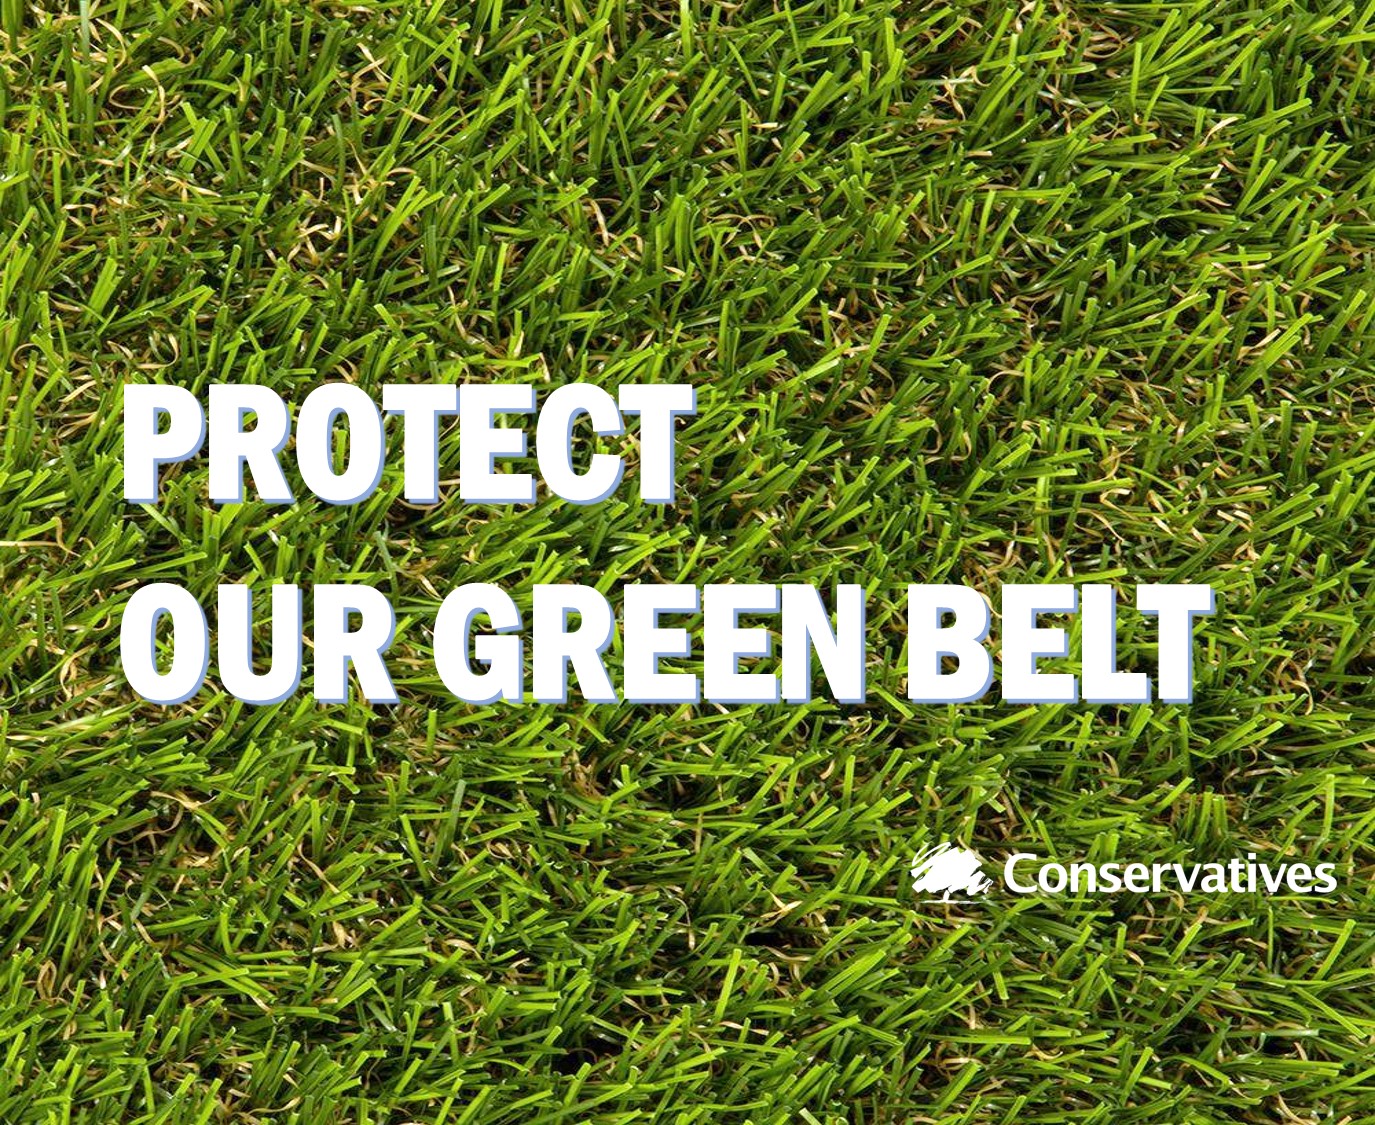 I will always defend our precious Greenbelt and Open Spaces